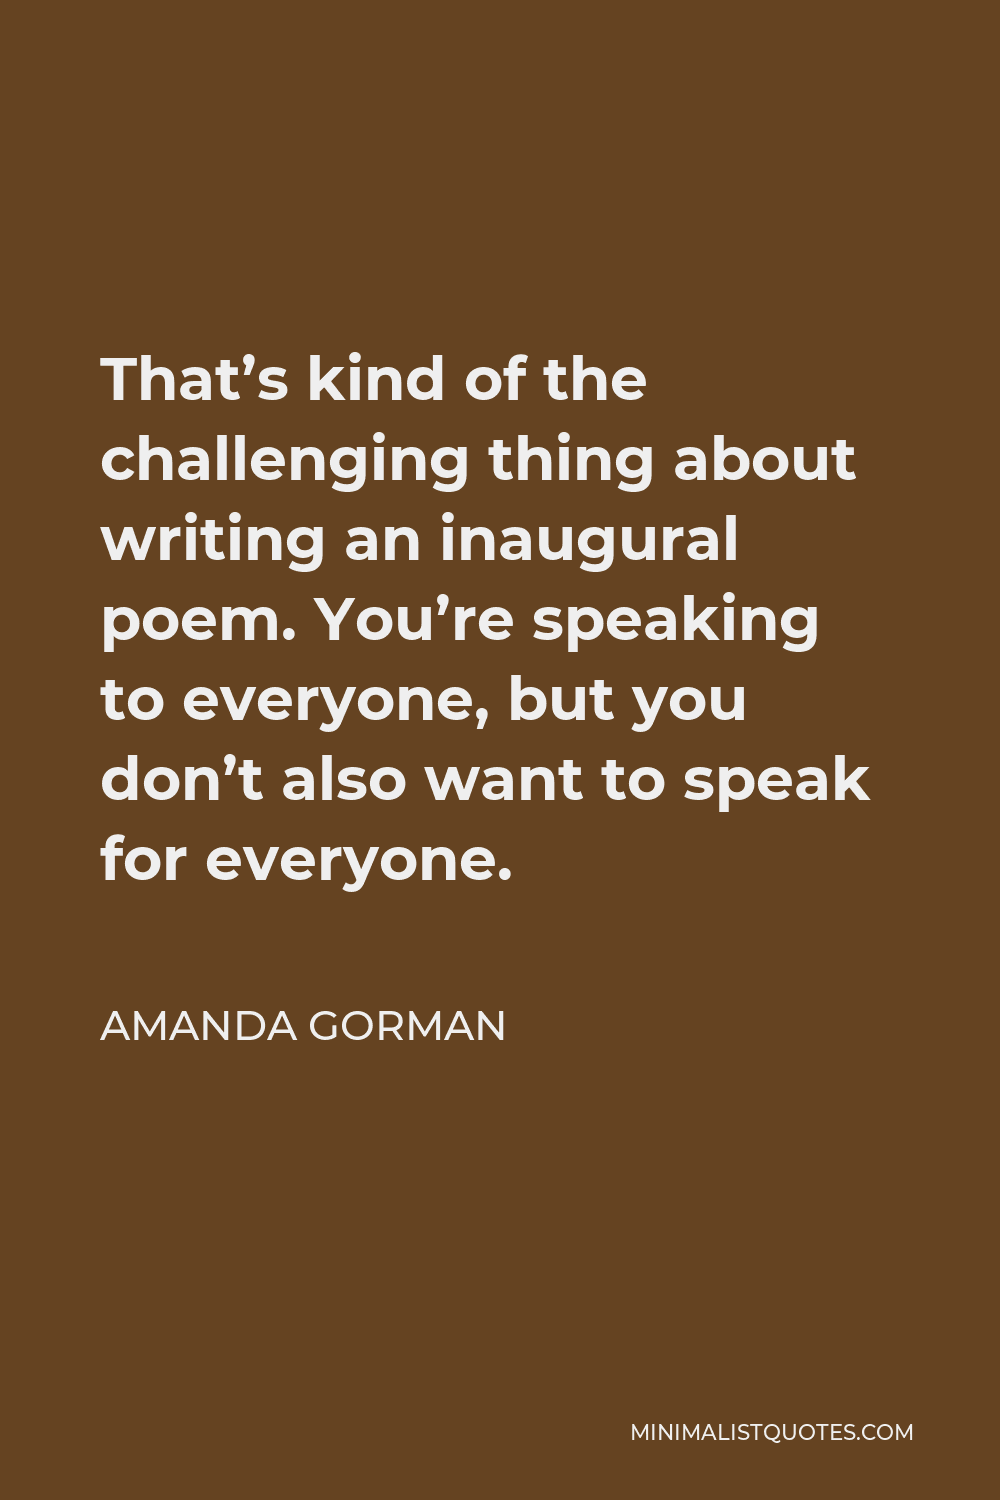 Amanda Gorman Quote - That’s kind of the challenging thing about writing an inaugural poem. You’re speaking to everyone, but you don’t also want to speak for everyone.